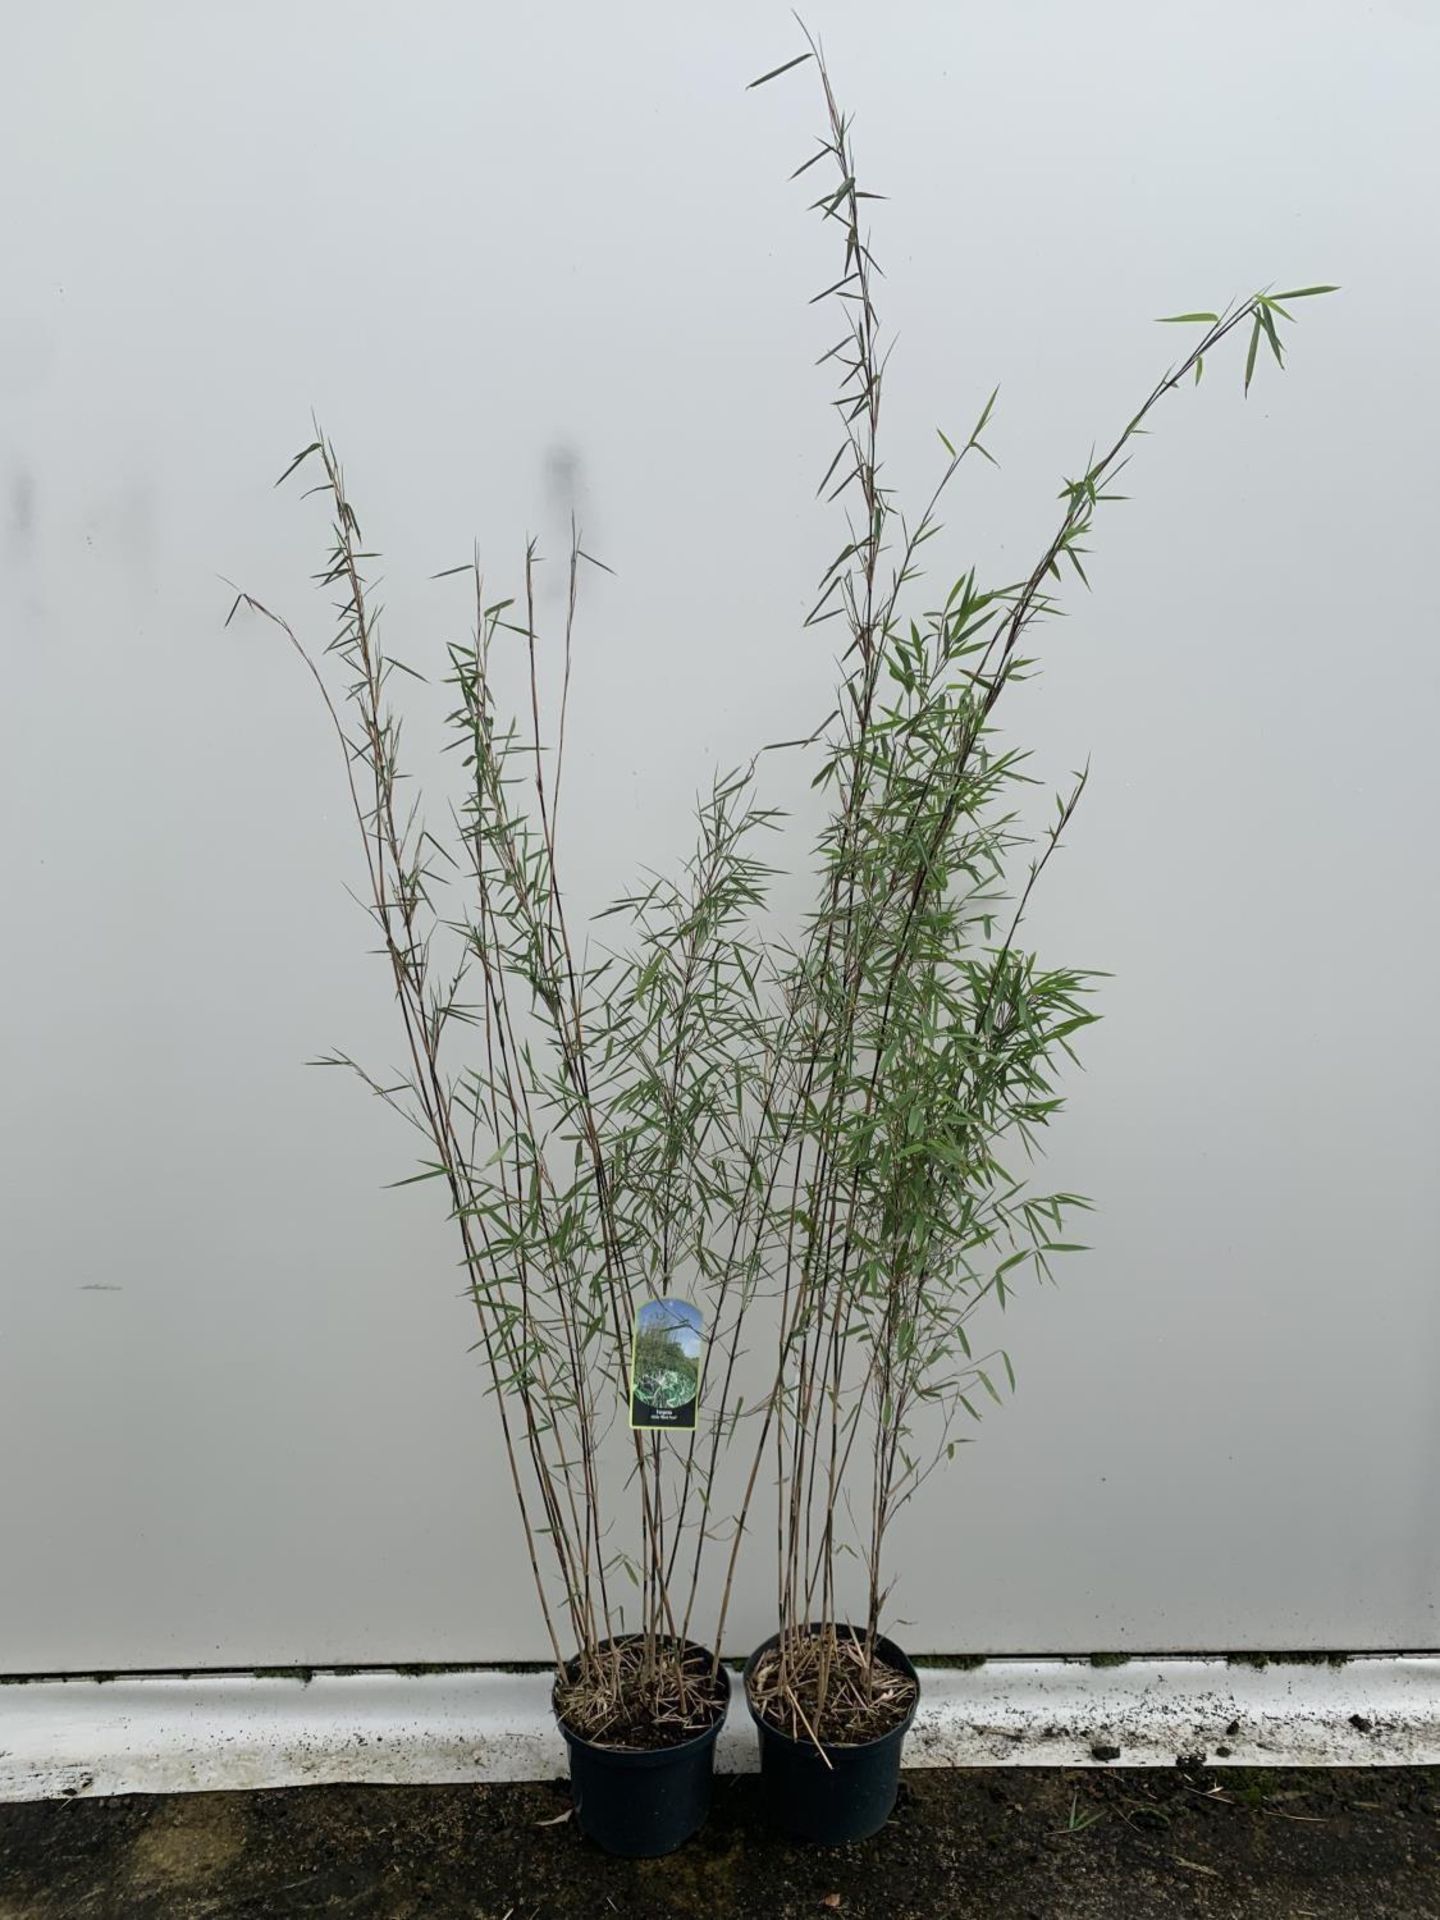 TWO BAMBOO FARGESIA NITIDA 'BLACK PEARL' APPROX 190CM IN HEIGHT IN 5 LTR POTS PLUS VAT TO BE SOLD - Image 7 of 10